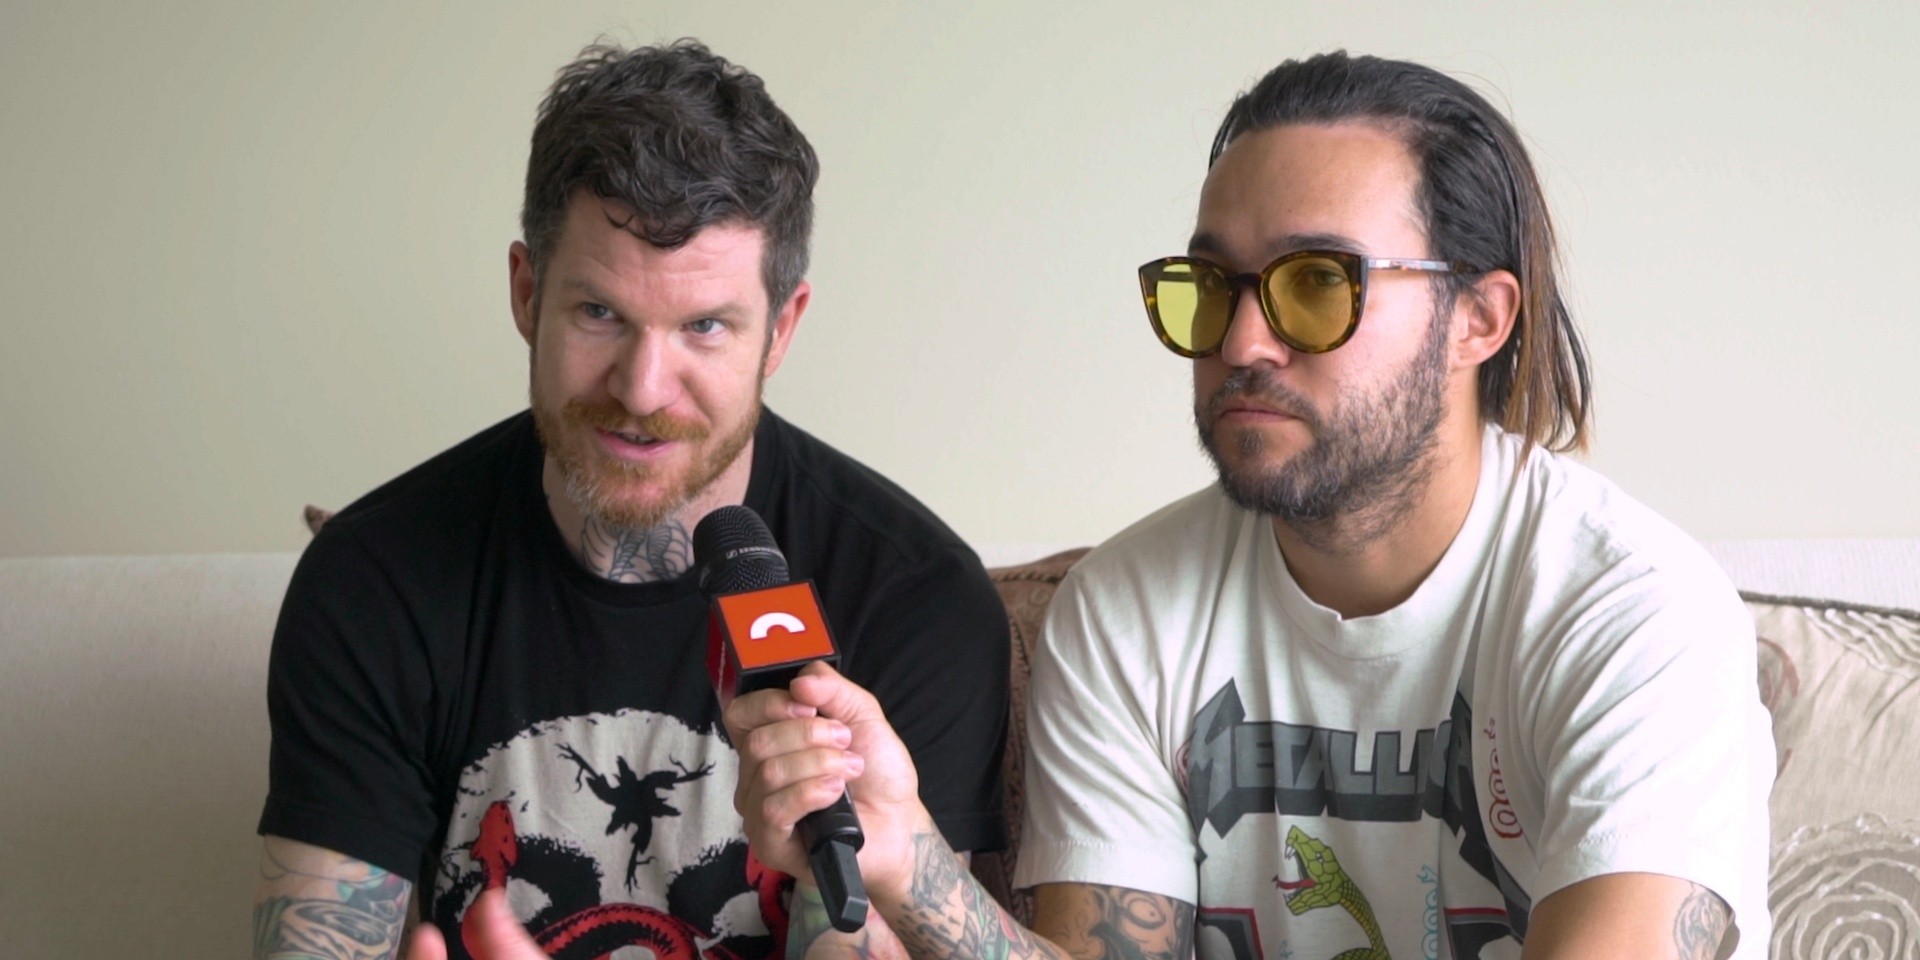 Pete Wentz and Andy Hurley talk the making of the latest Fall Out Boy album MANIA – watch